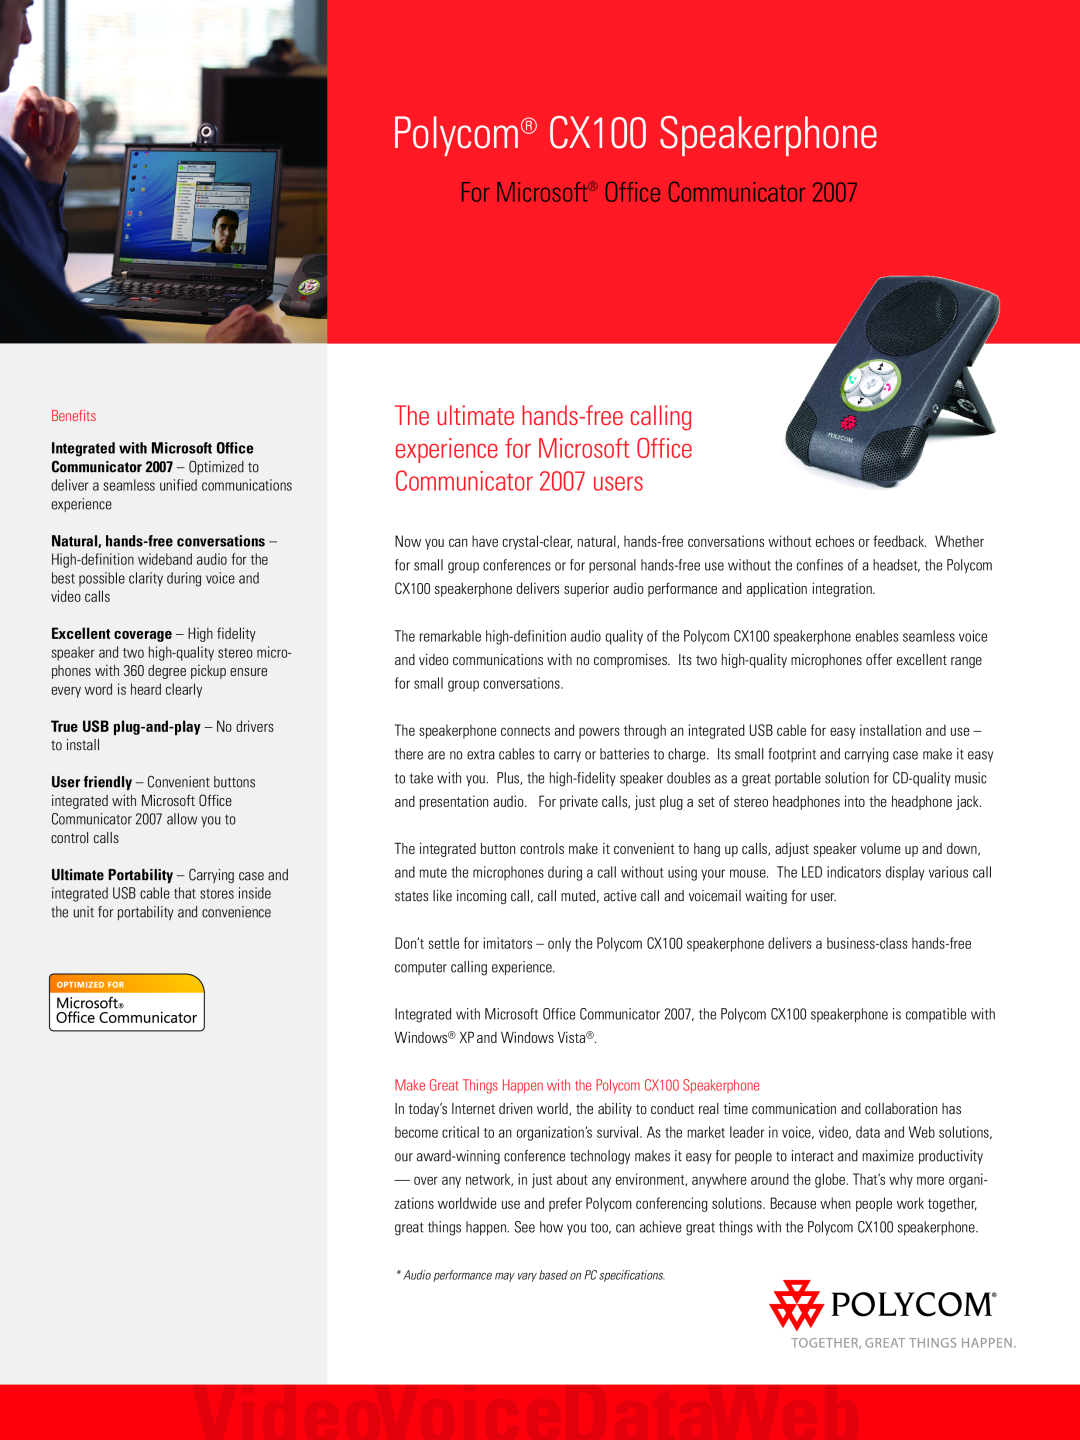 Polycom CX100MS, 3726-17776-001 specifications Benefits, Make Great Things Happen with the Polycom CX100 Speakerphone 